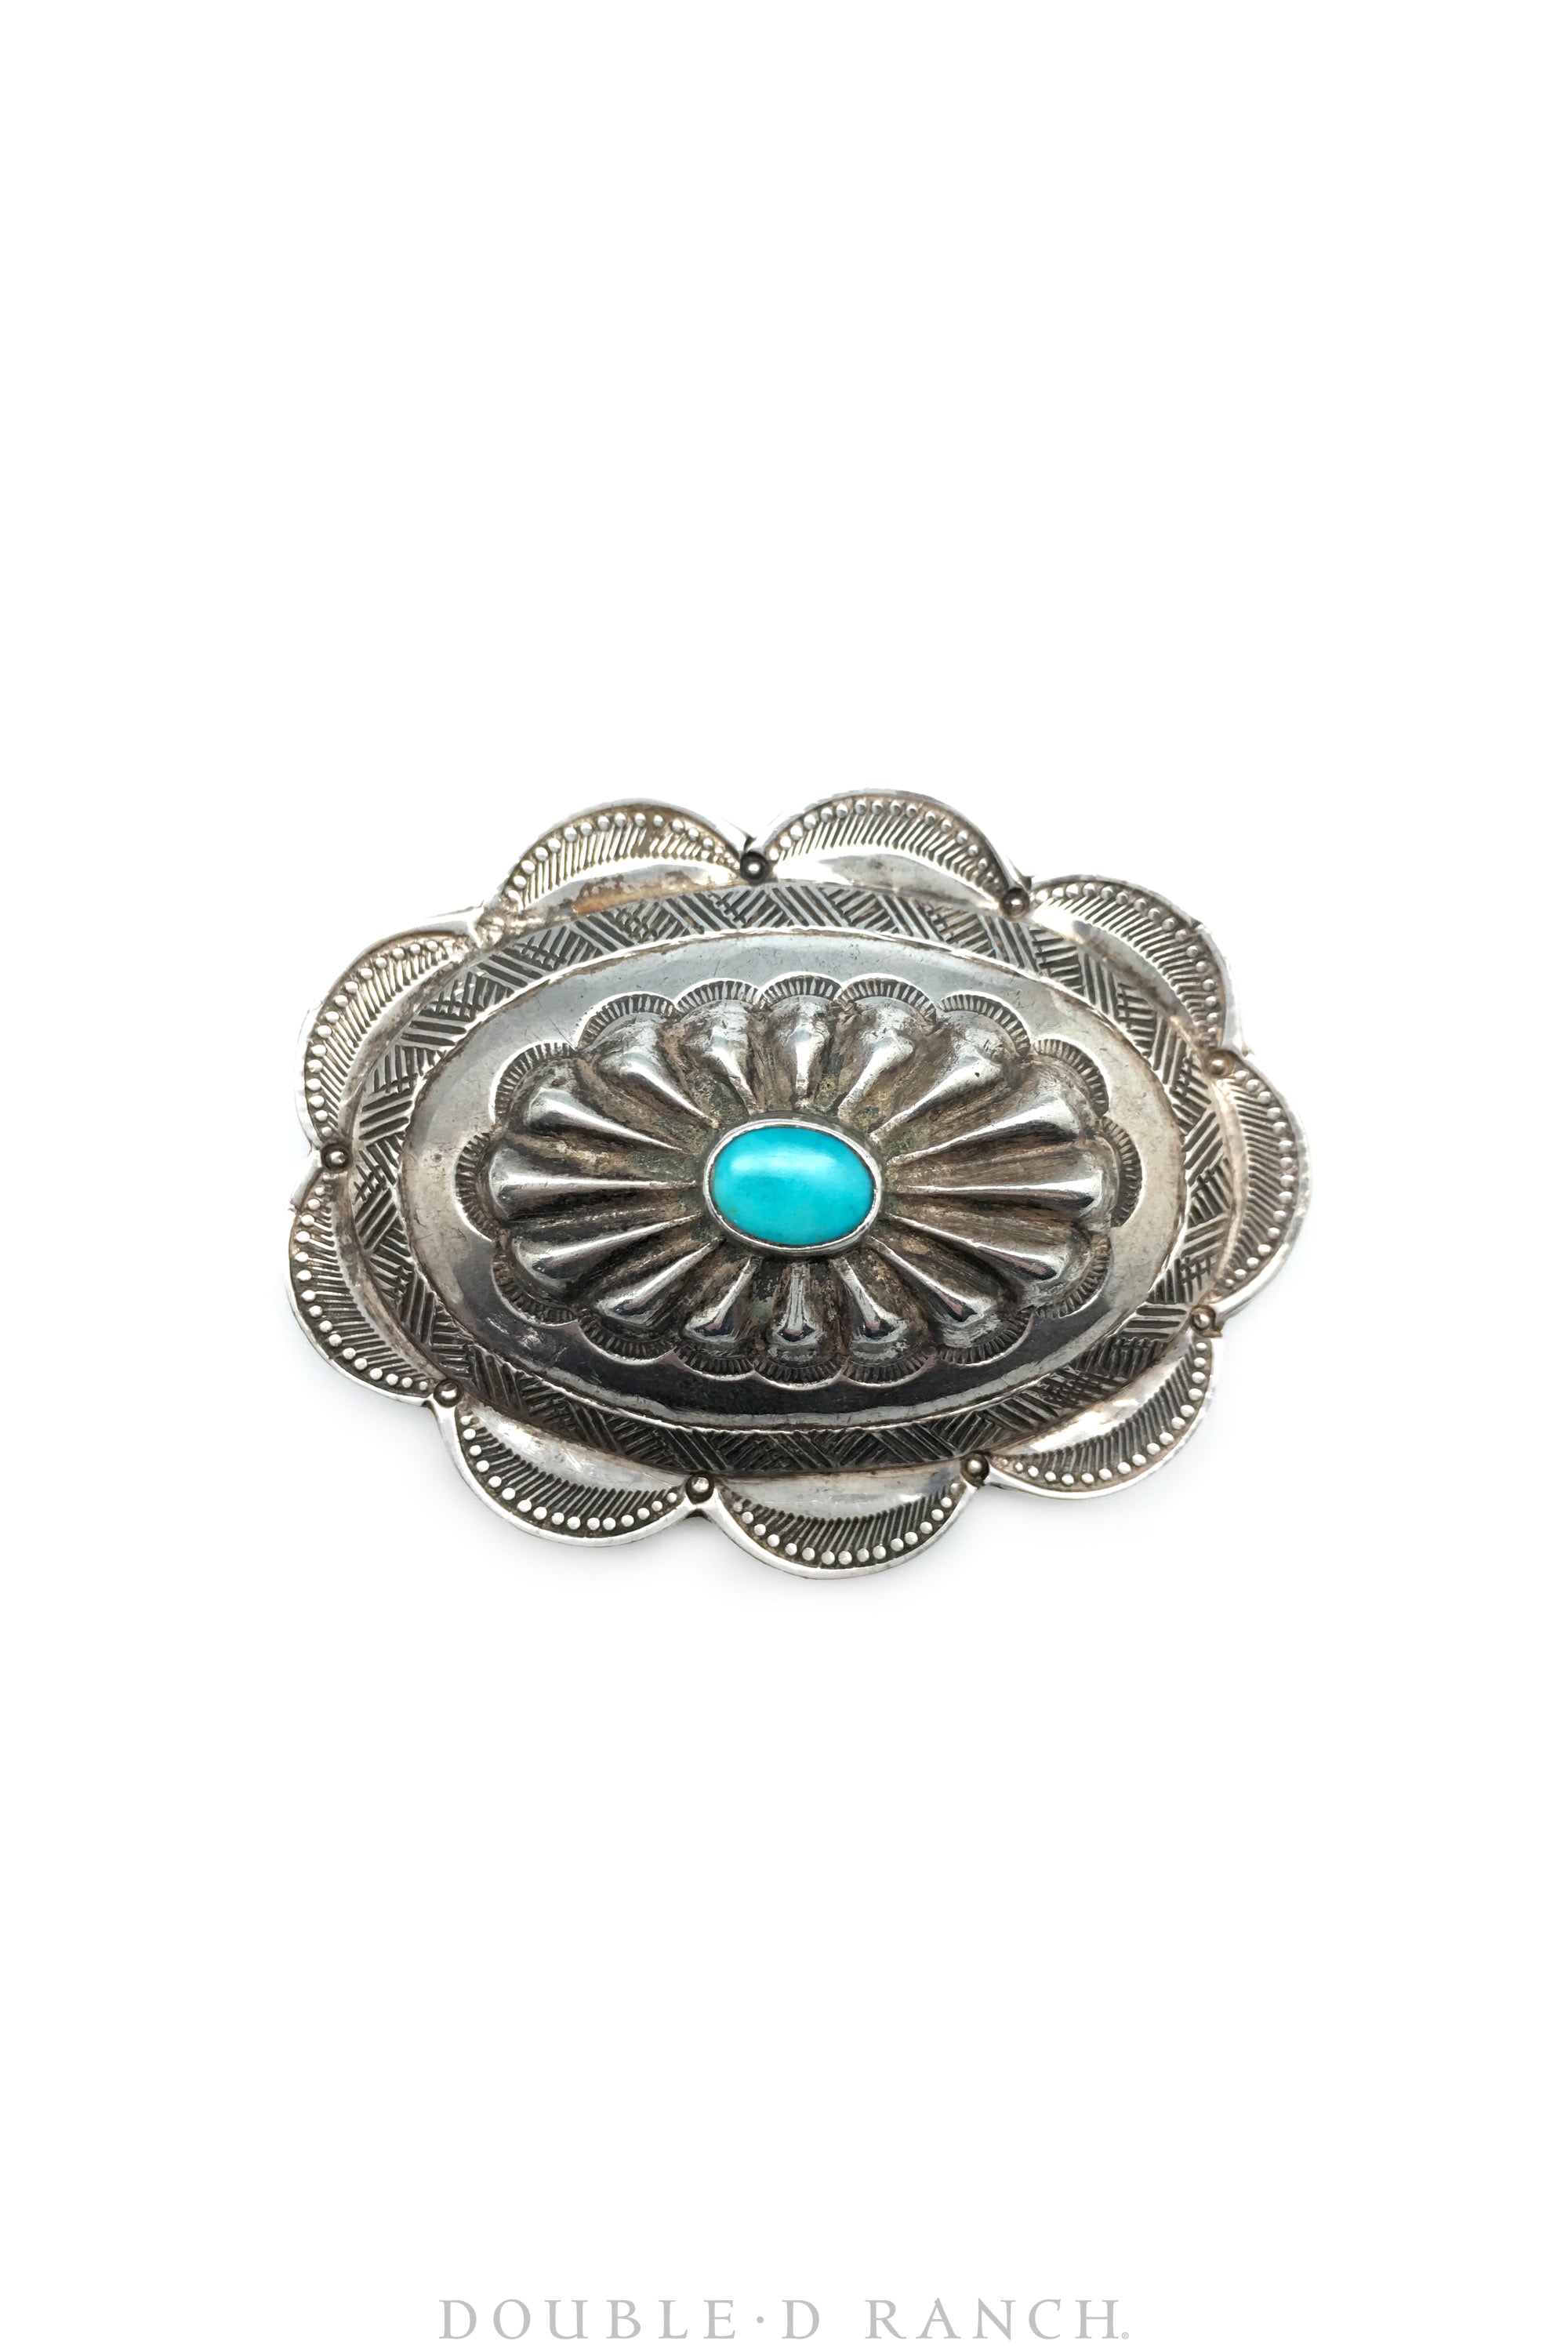 Pin, Turquoise, Concho, Vintage, 1940's, 141